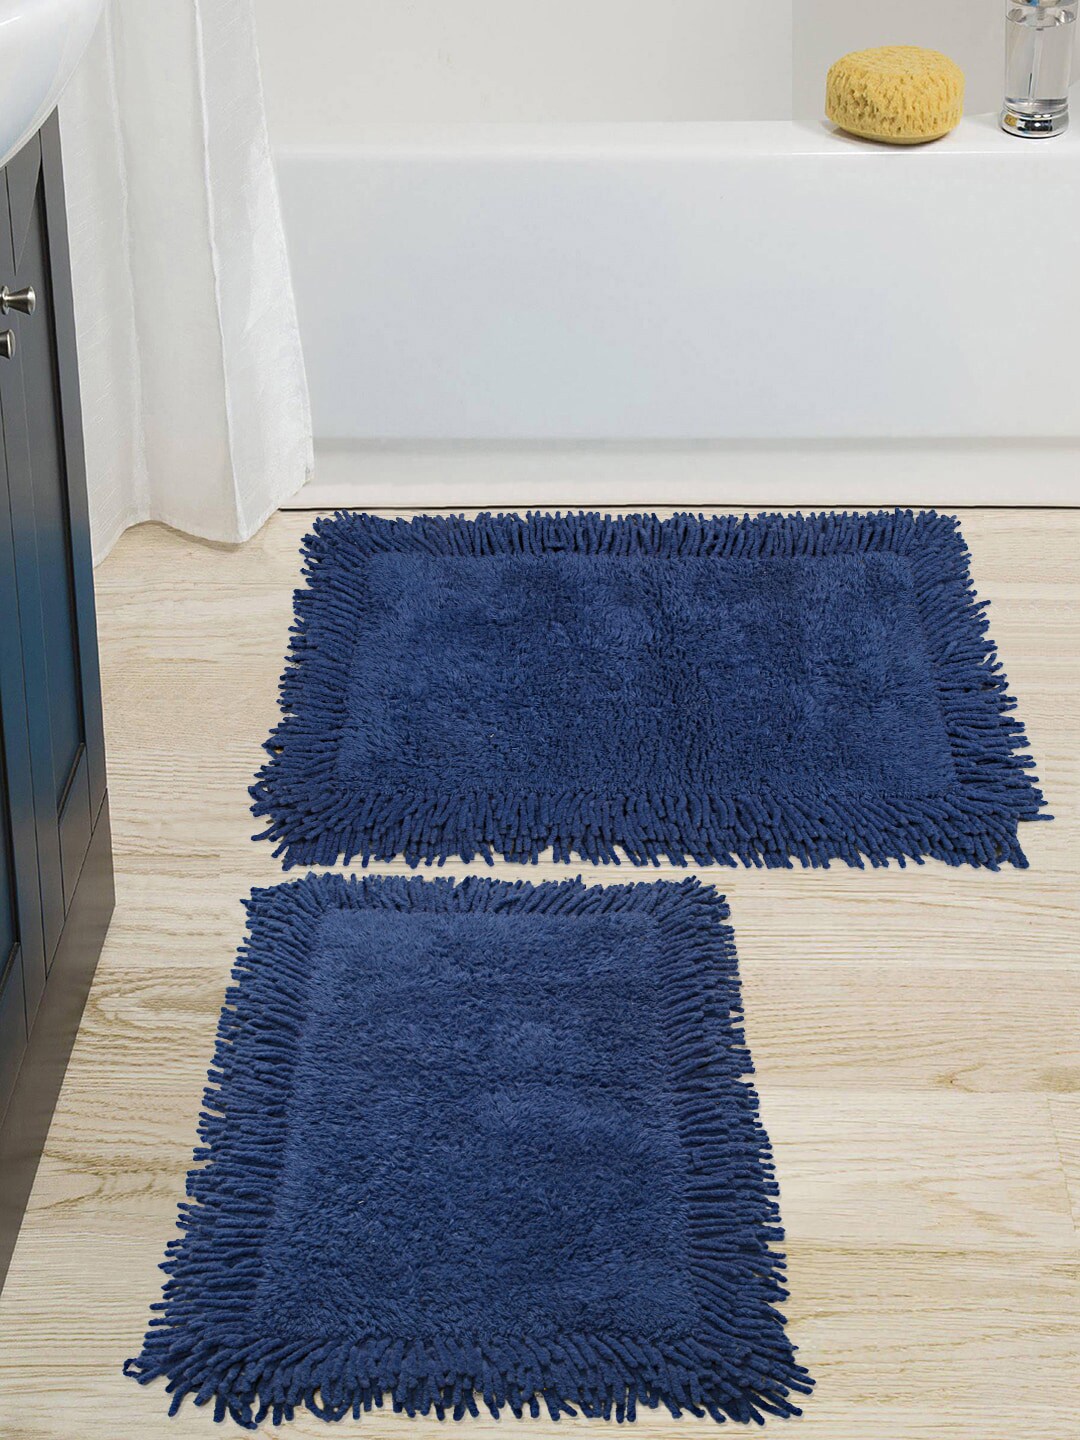 Saral Home Blue Set of 2 Solid Cotton 1666 GSM Shaggy Bath Mats Price in India